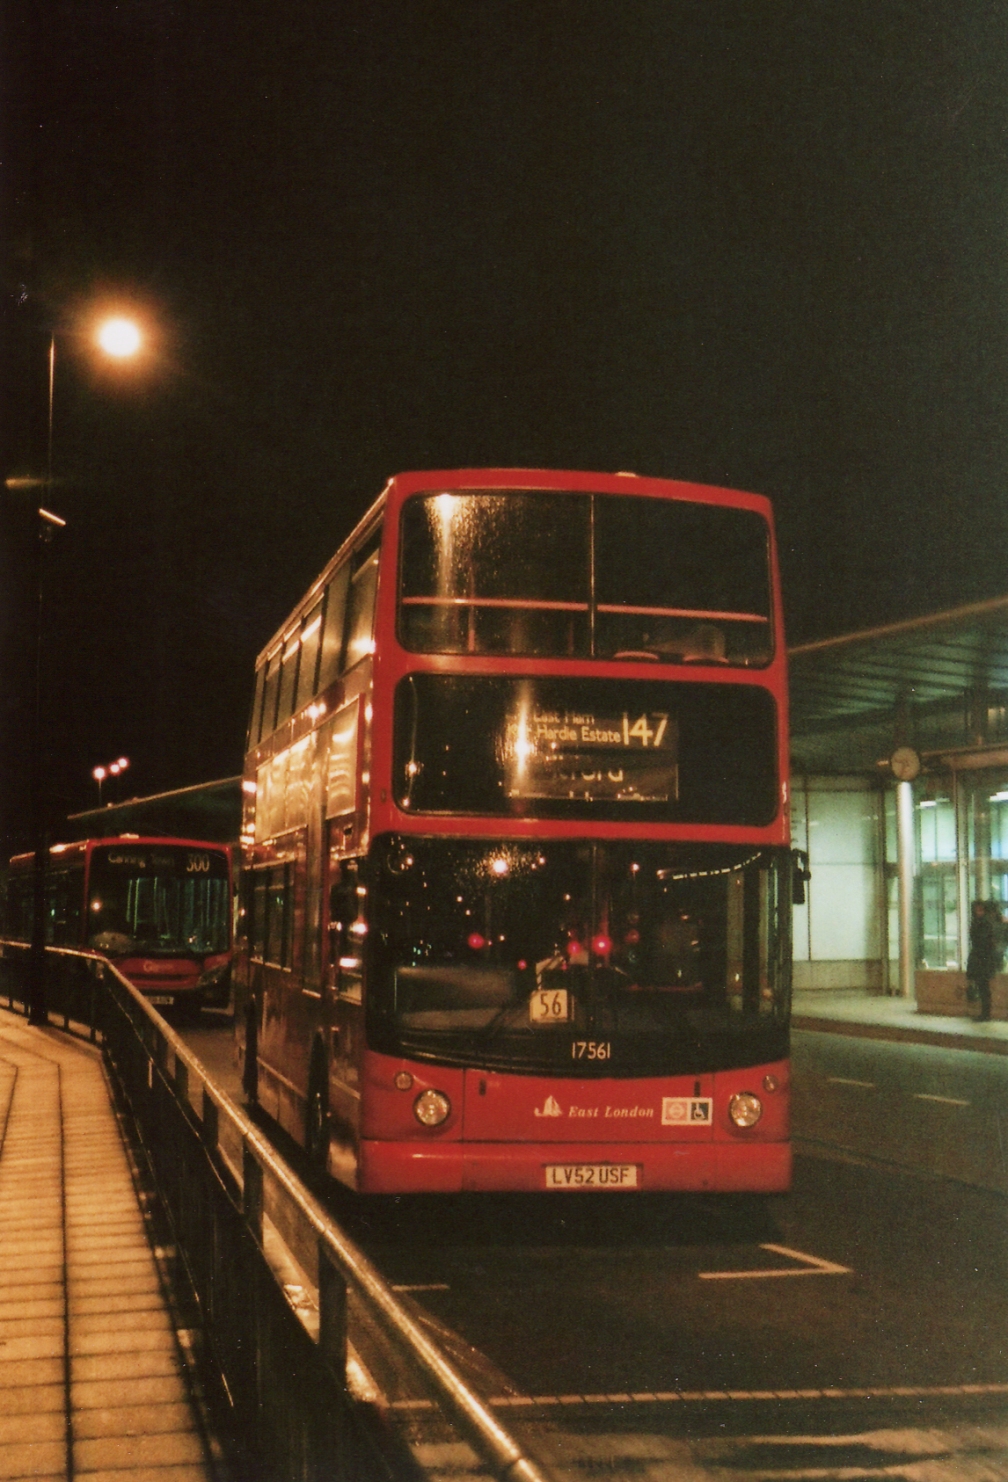 LV52USF 17561 CANNING TOWN 9-10